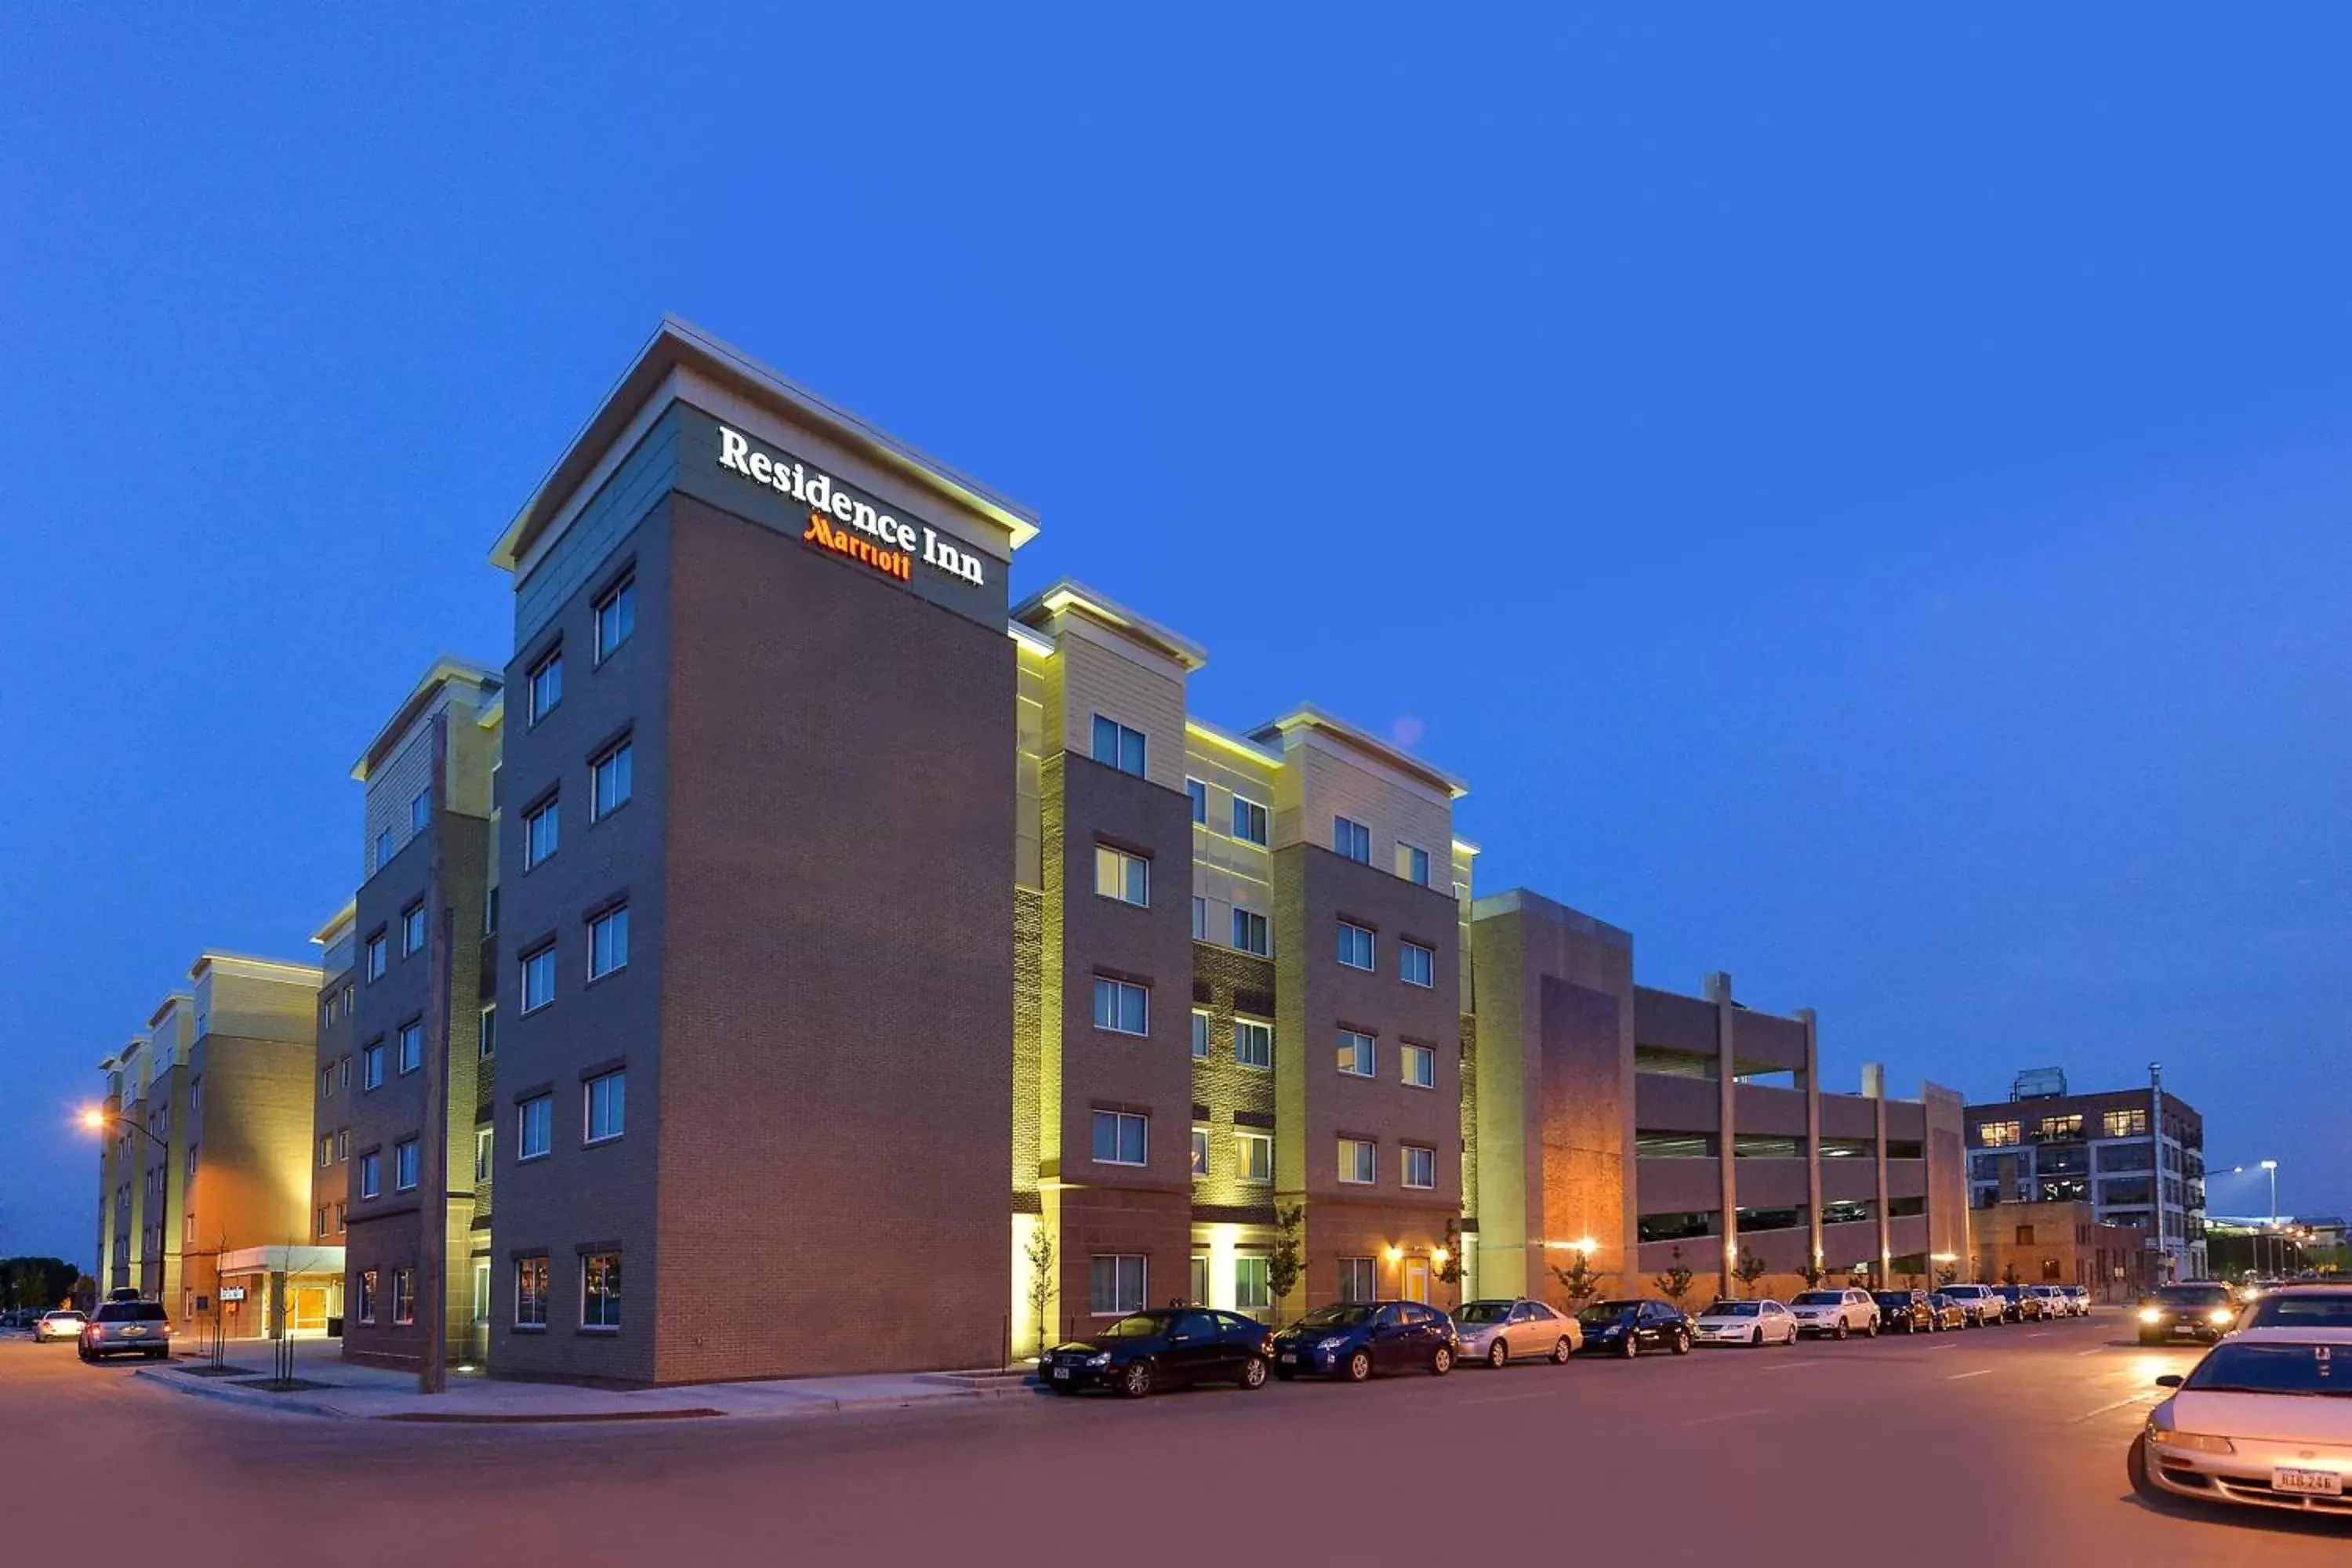 Property Building in Residence Inn by Marriott Des Moines Downtown